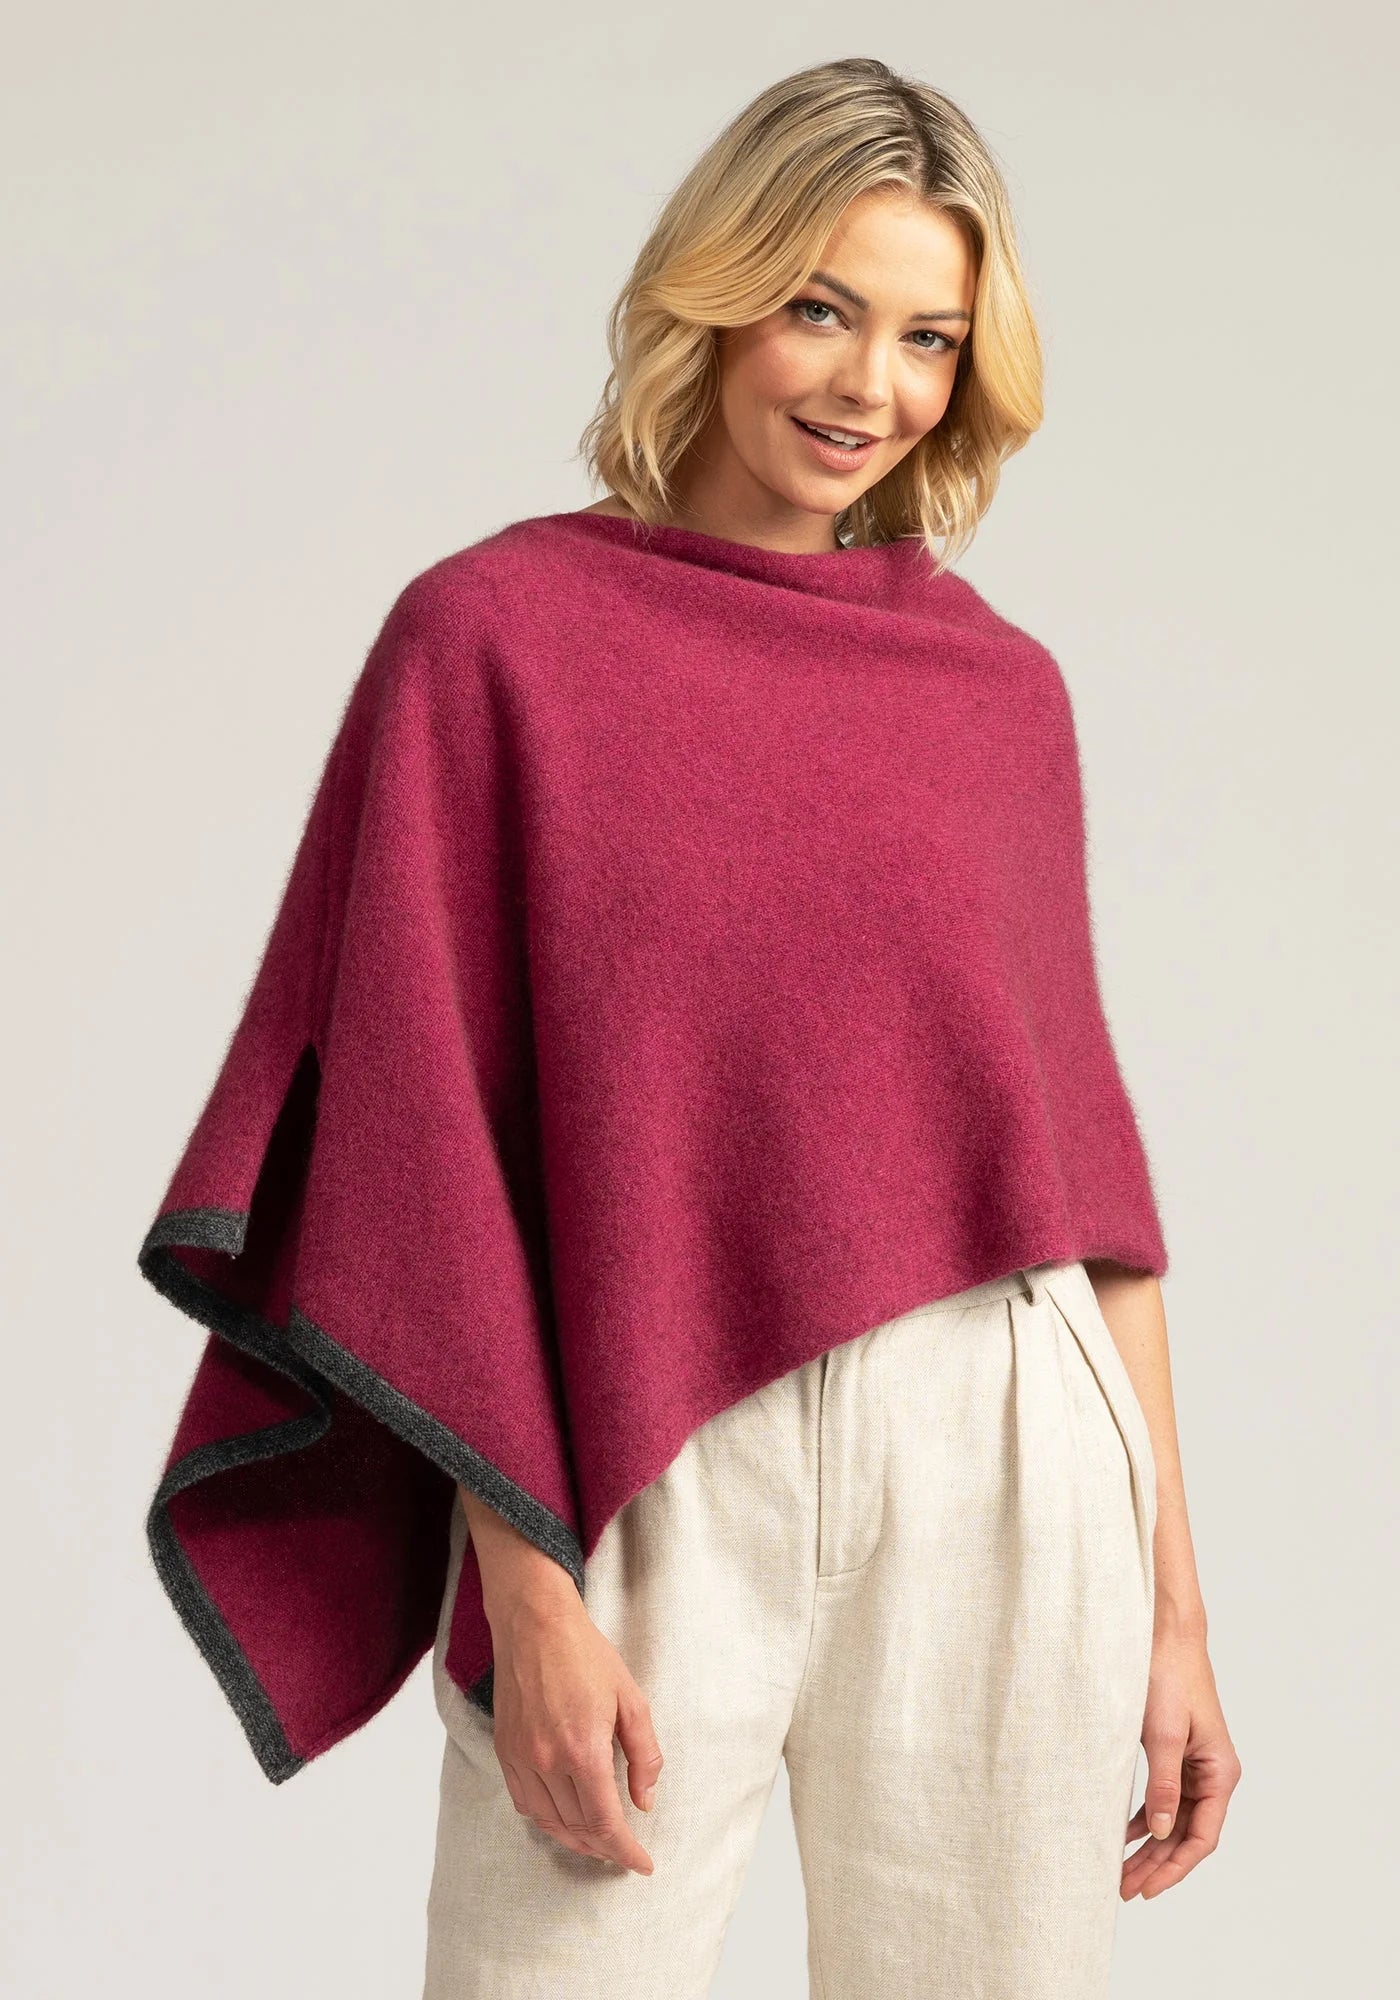 Wrap yourself in luxury with our Pink Merino Wool Poncho with grey trim. Effortless elegance in every stitch. Shop now!